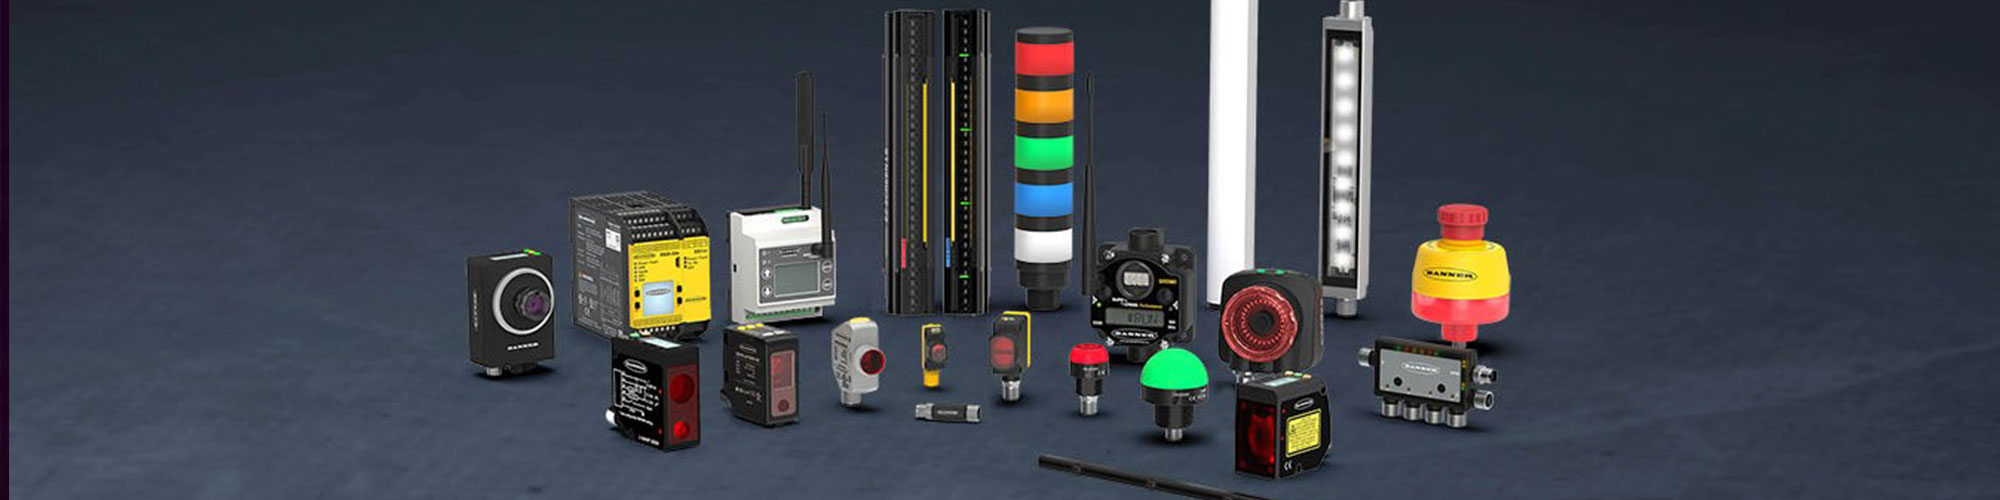 Banner Engineering Distributor | Electric Supply & Equipment